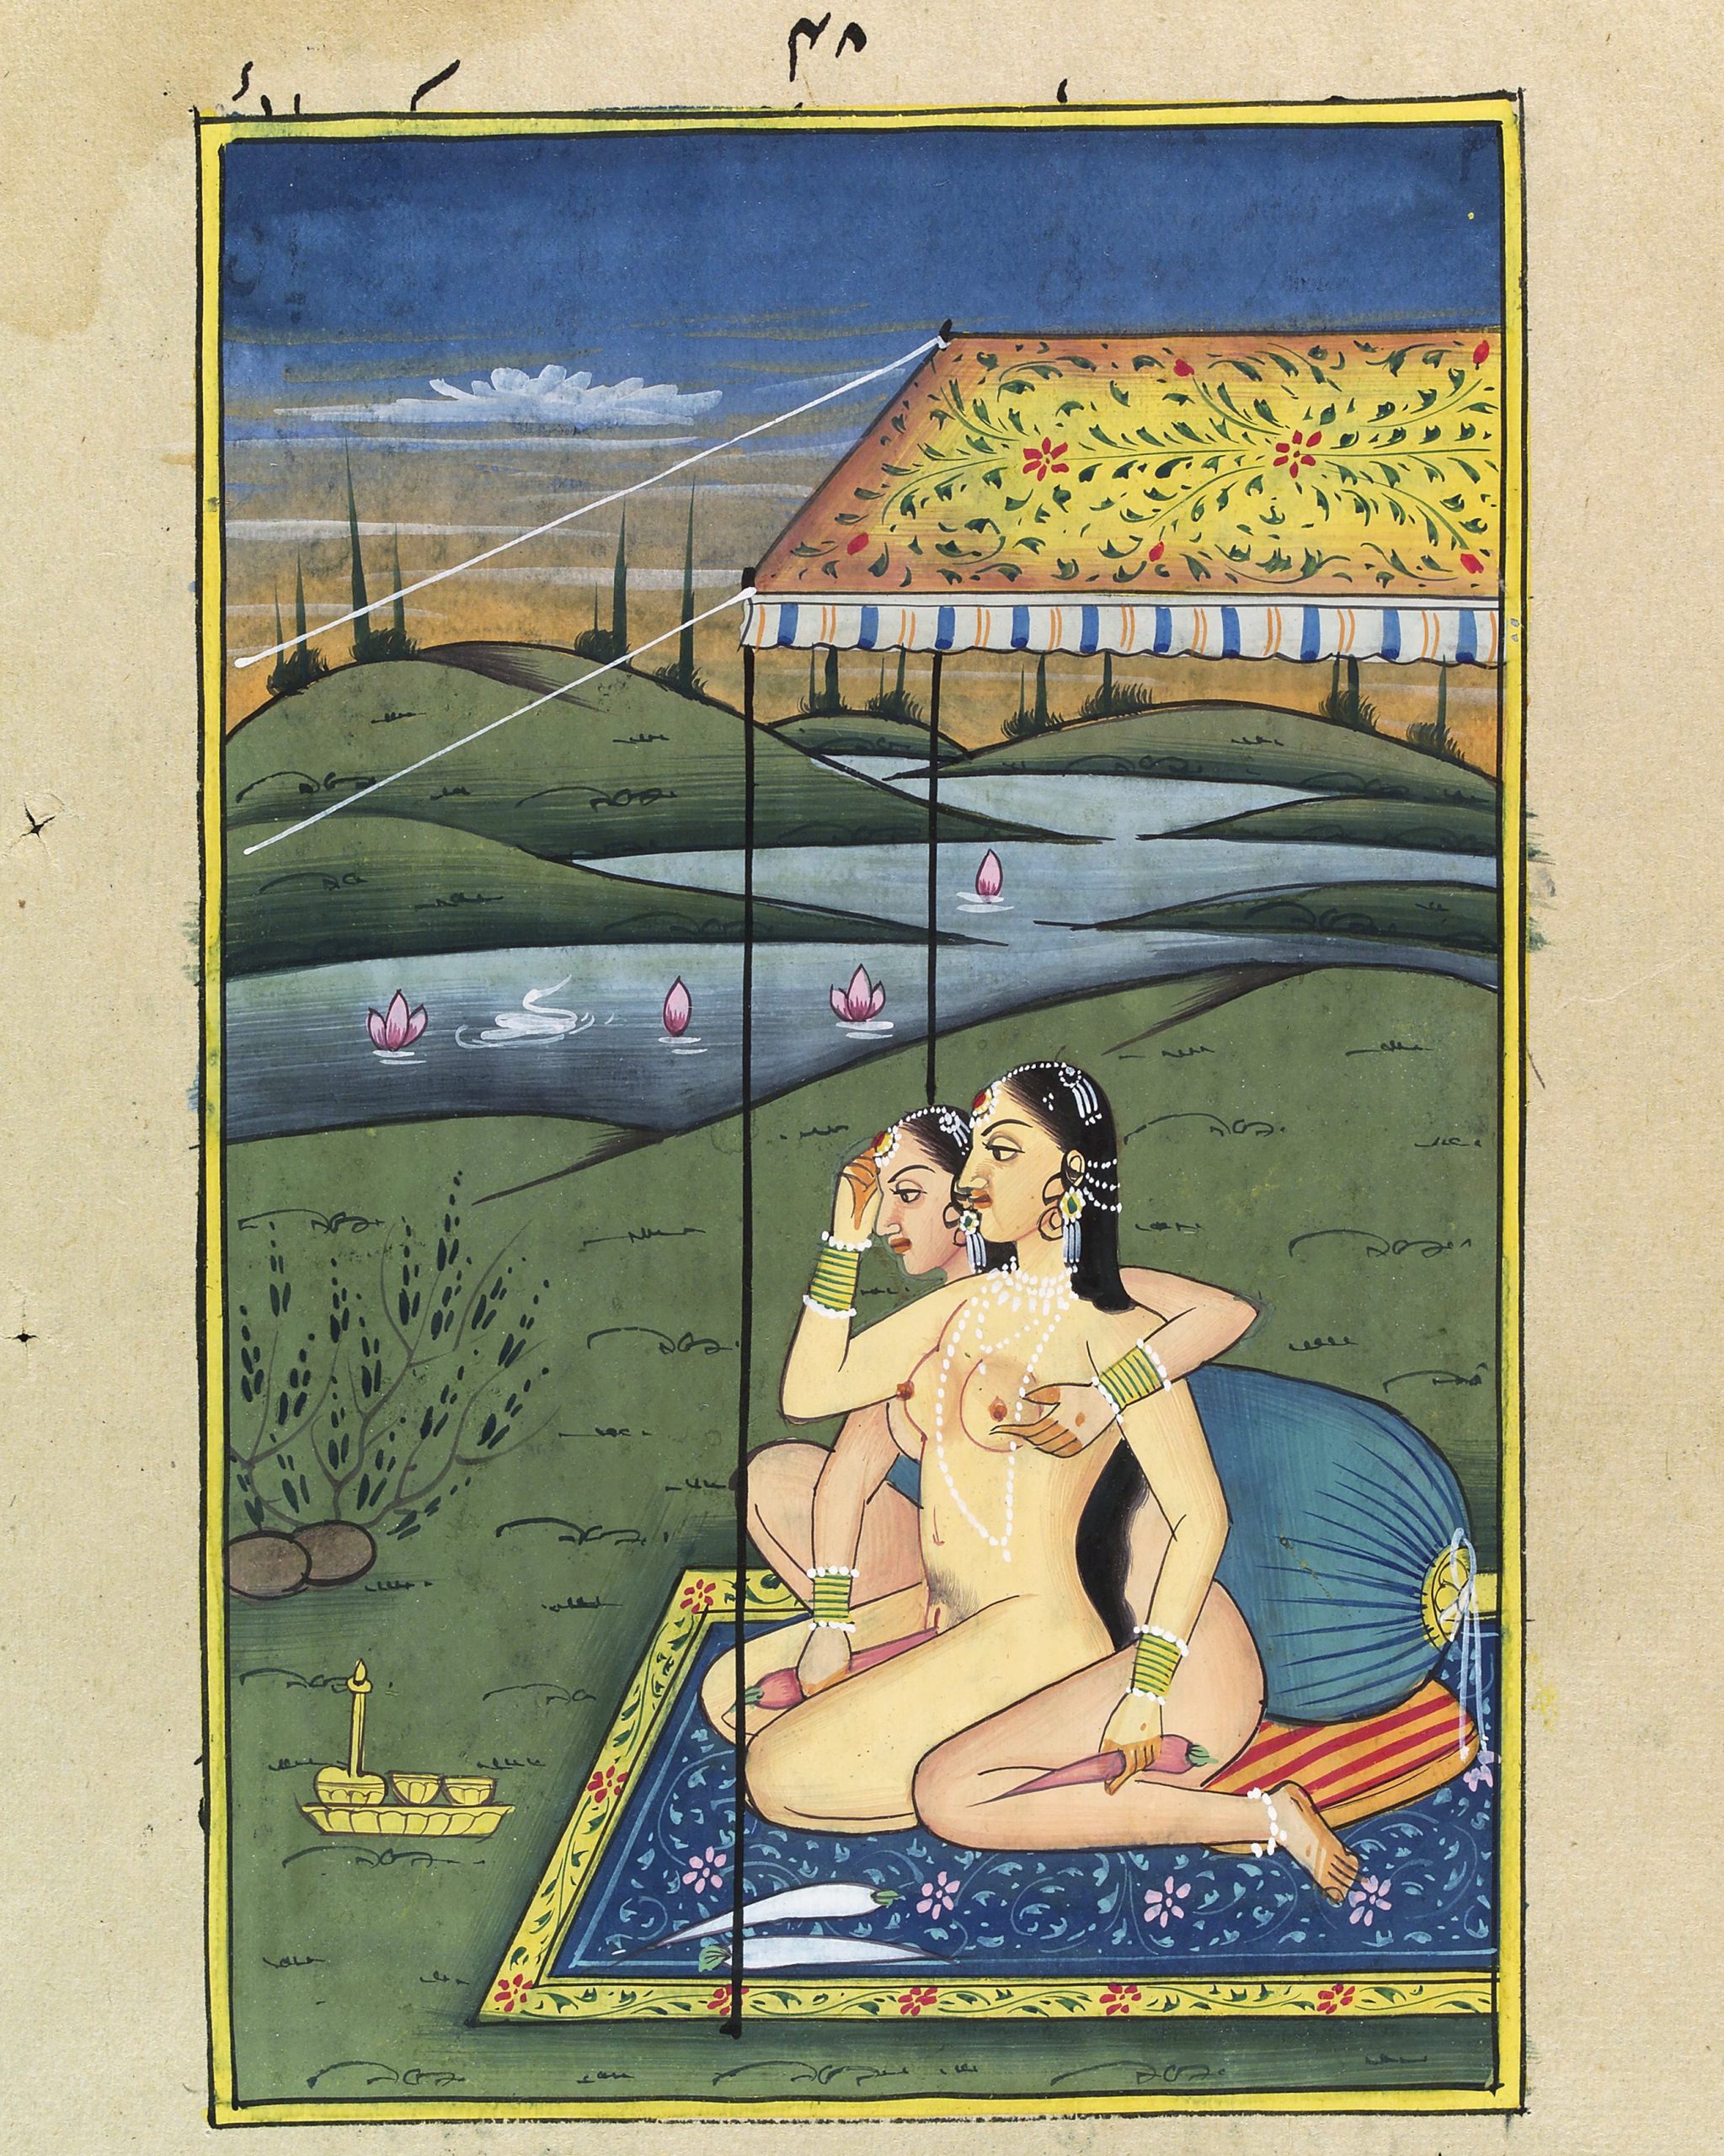 Two women embracing and using carrots as dildos. Gouache painting by an Indian painter. Dated between 1900 and 1999. Courtesy The Wellcome Library